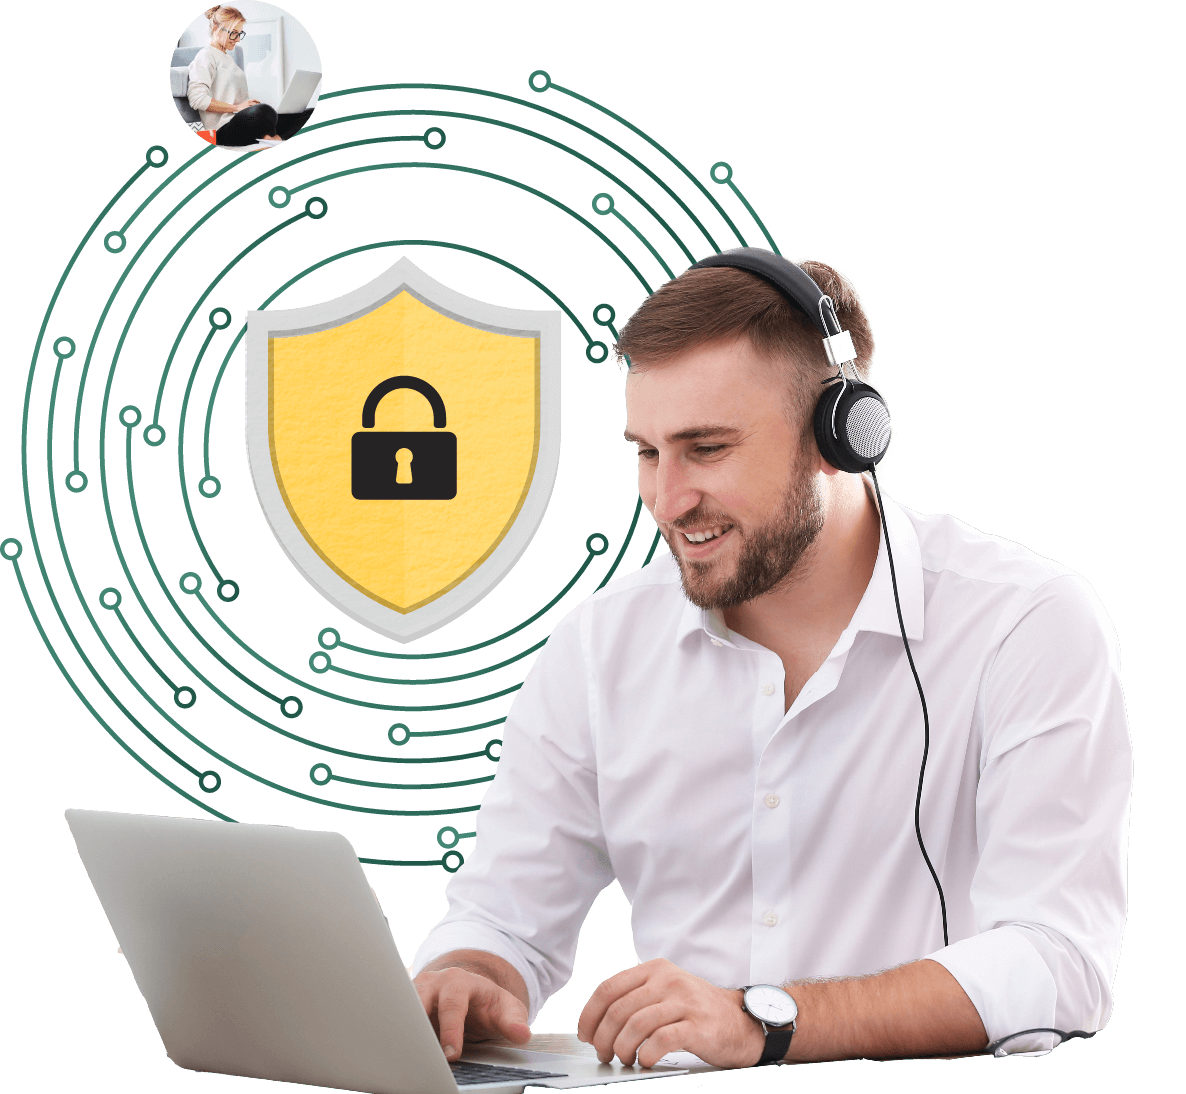 Get your secure remote access software now